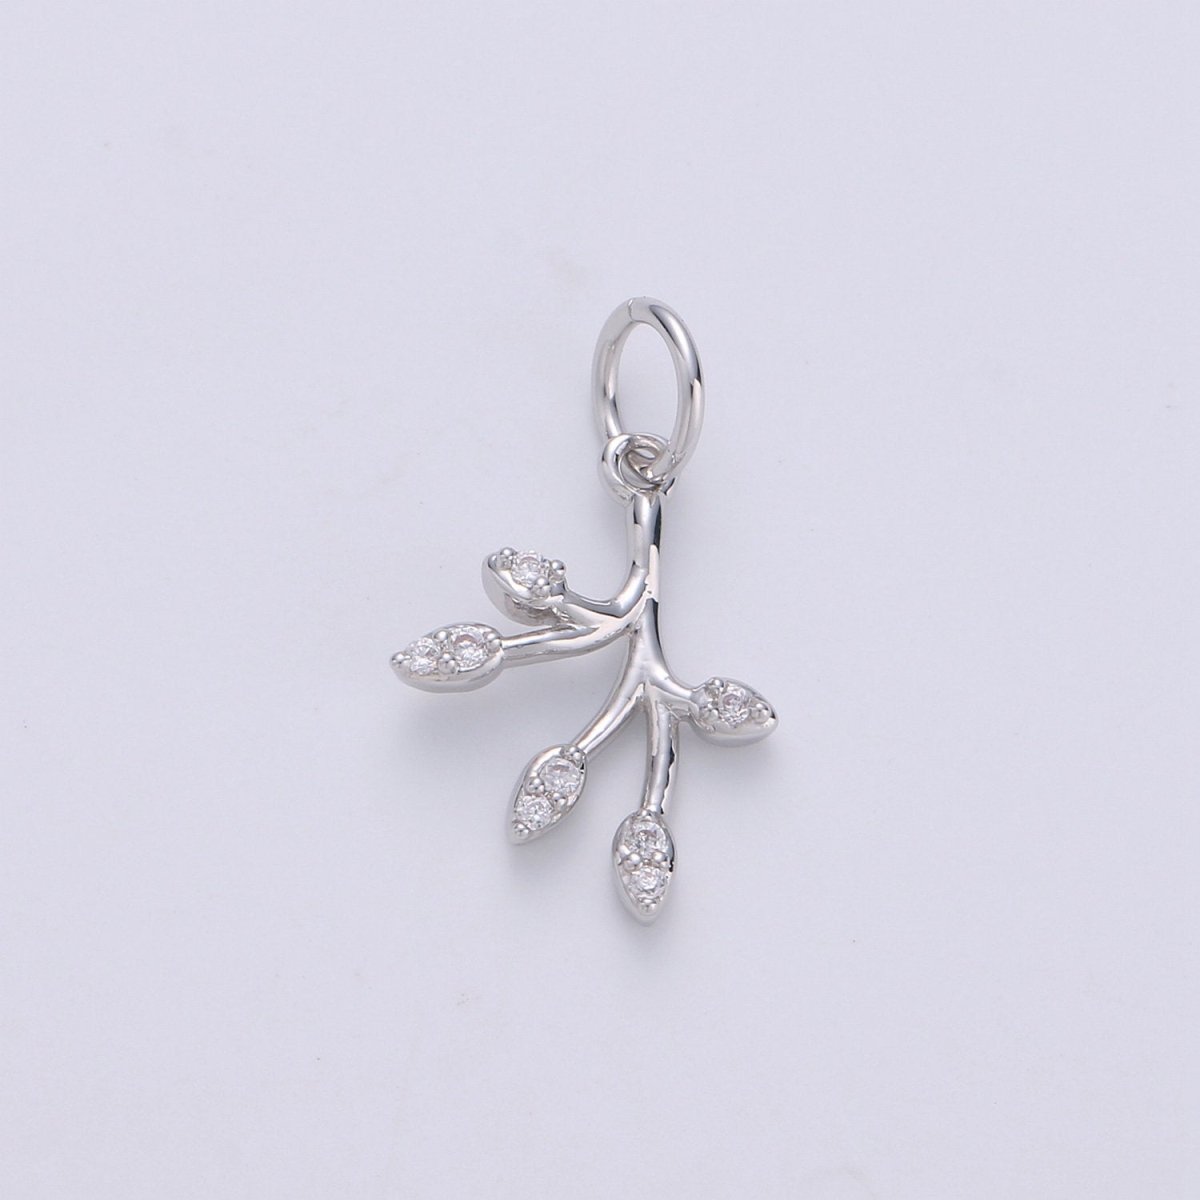 Gold Olive Leaf Charms Pendant,Tree Branch Leaf Charm Fit DIY Earring Necklace Jewelry Accessory DIY Craft Micro Pave Dainty Charm D-549 D-550 - DLUXCA